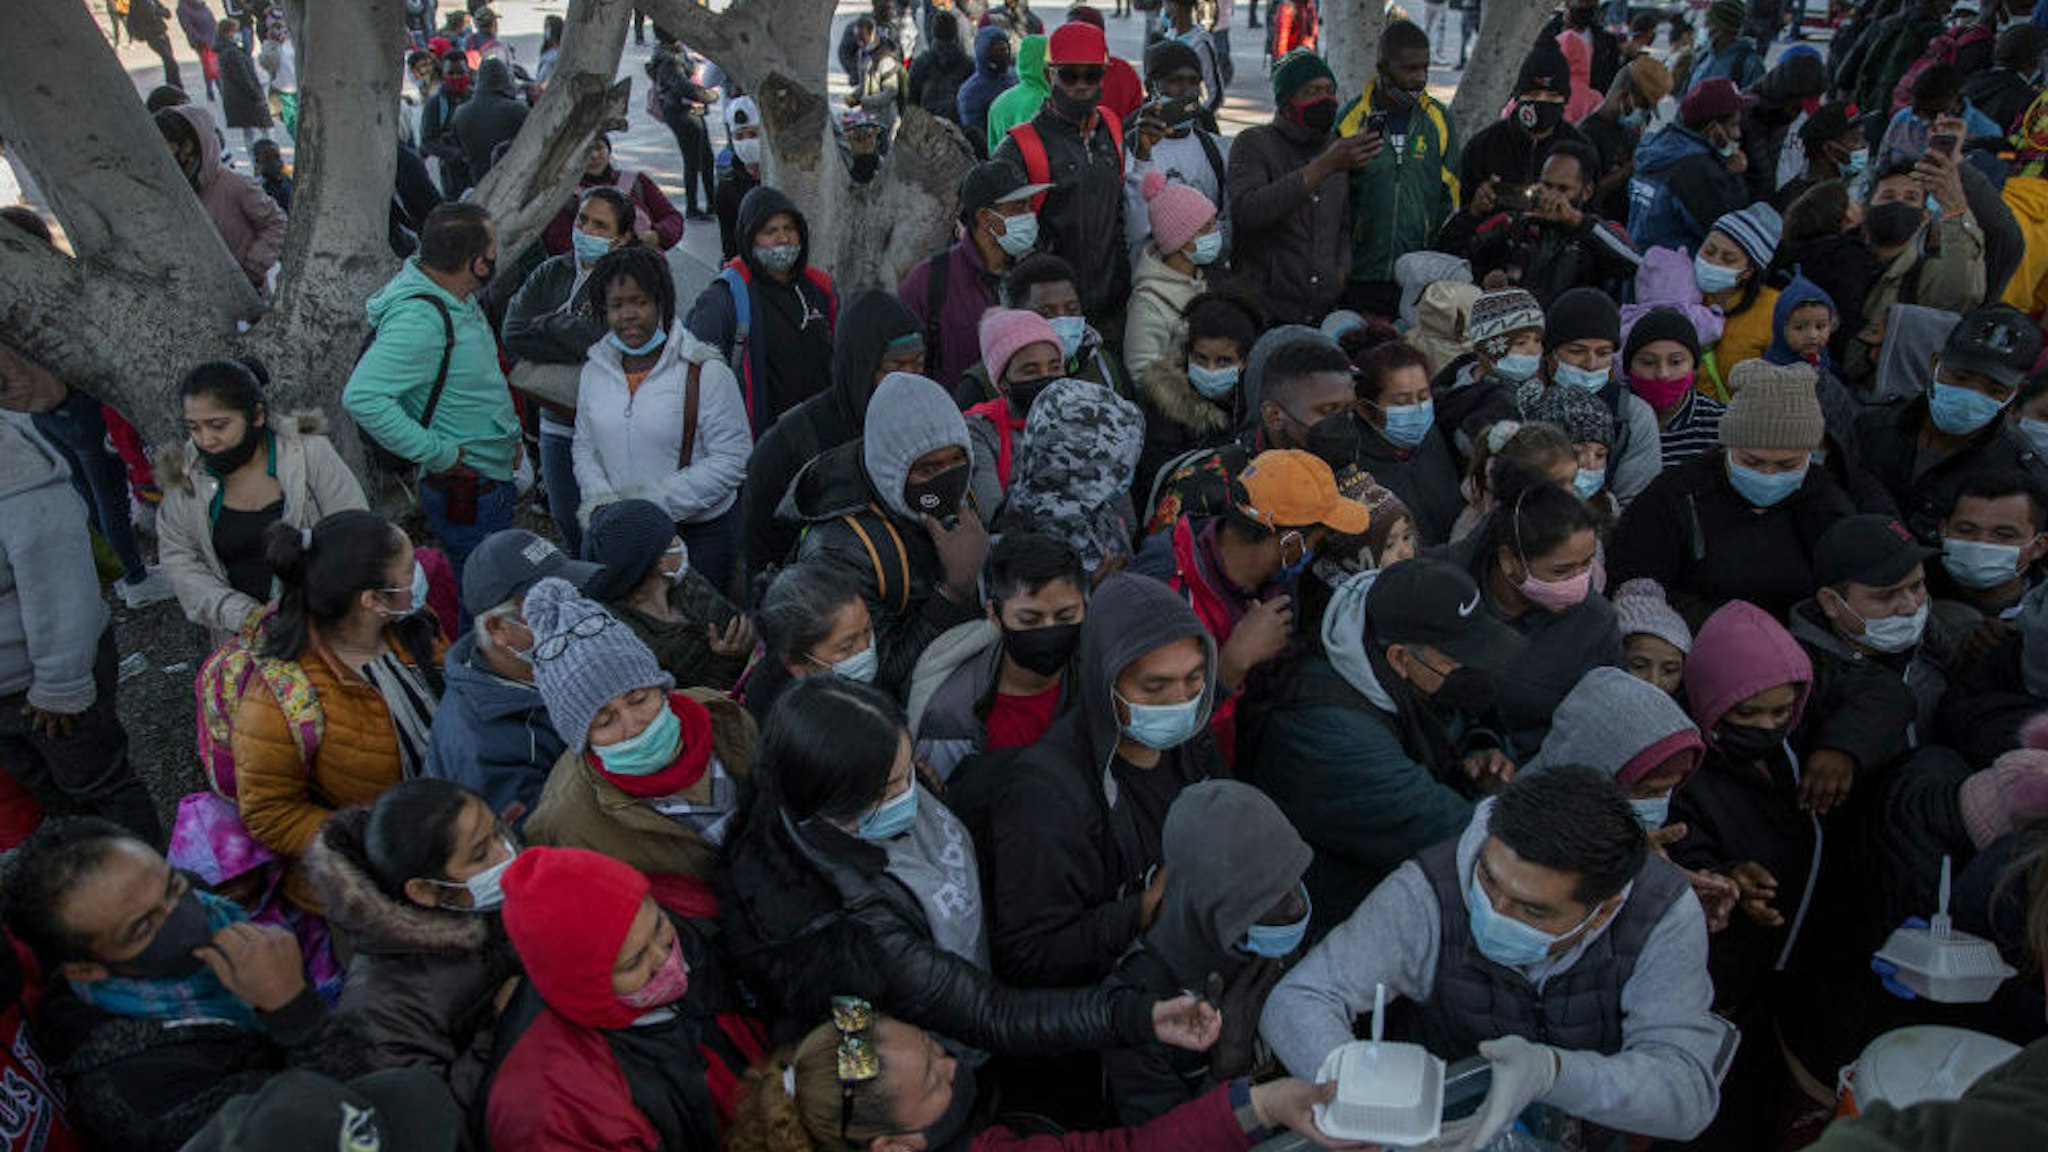 19 February 2021, Mexico, Tijuana: Numerous migrants wearing masks gather and wait for food and water to be distributed at the border crossing. Following the announced change of direction in US migration policy, numerous migrants have gathered at the border between Mexico and the US, hoping to gain entry to the US. With the new regulation US President Biden's administration is breaking with the restrictive immigration policy of his predecessor Trump. Photo: Stringer/dpa